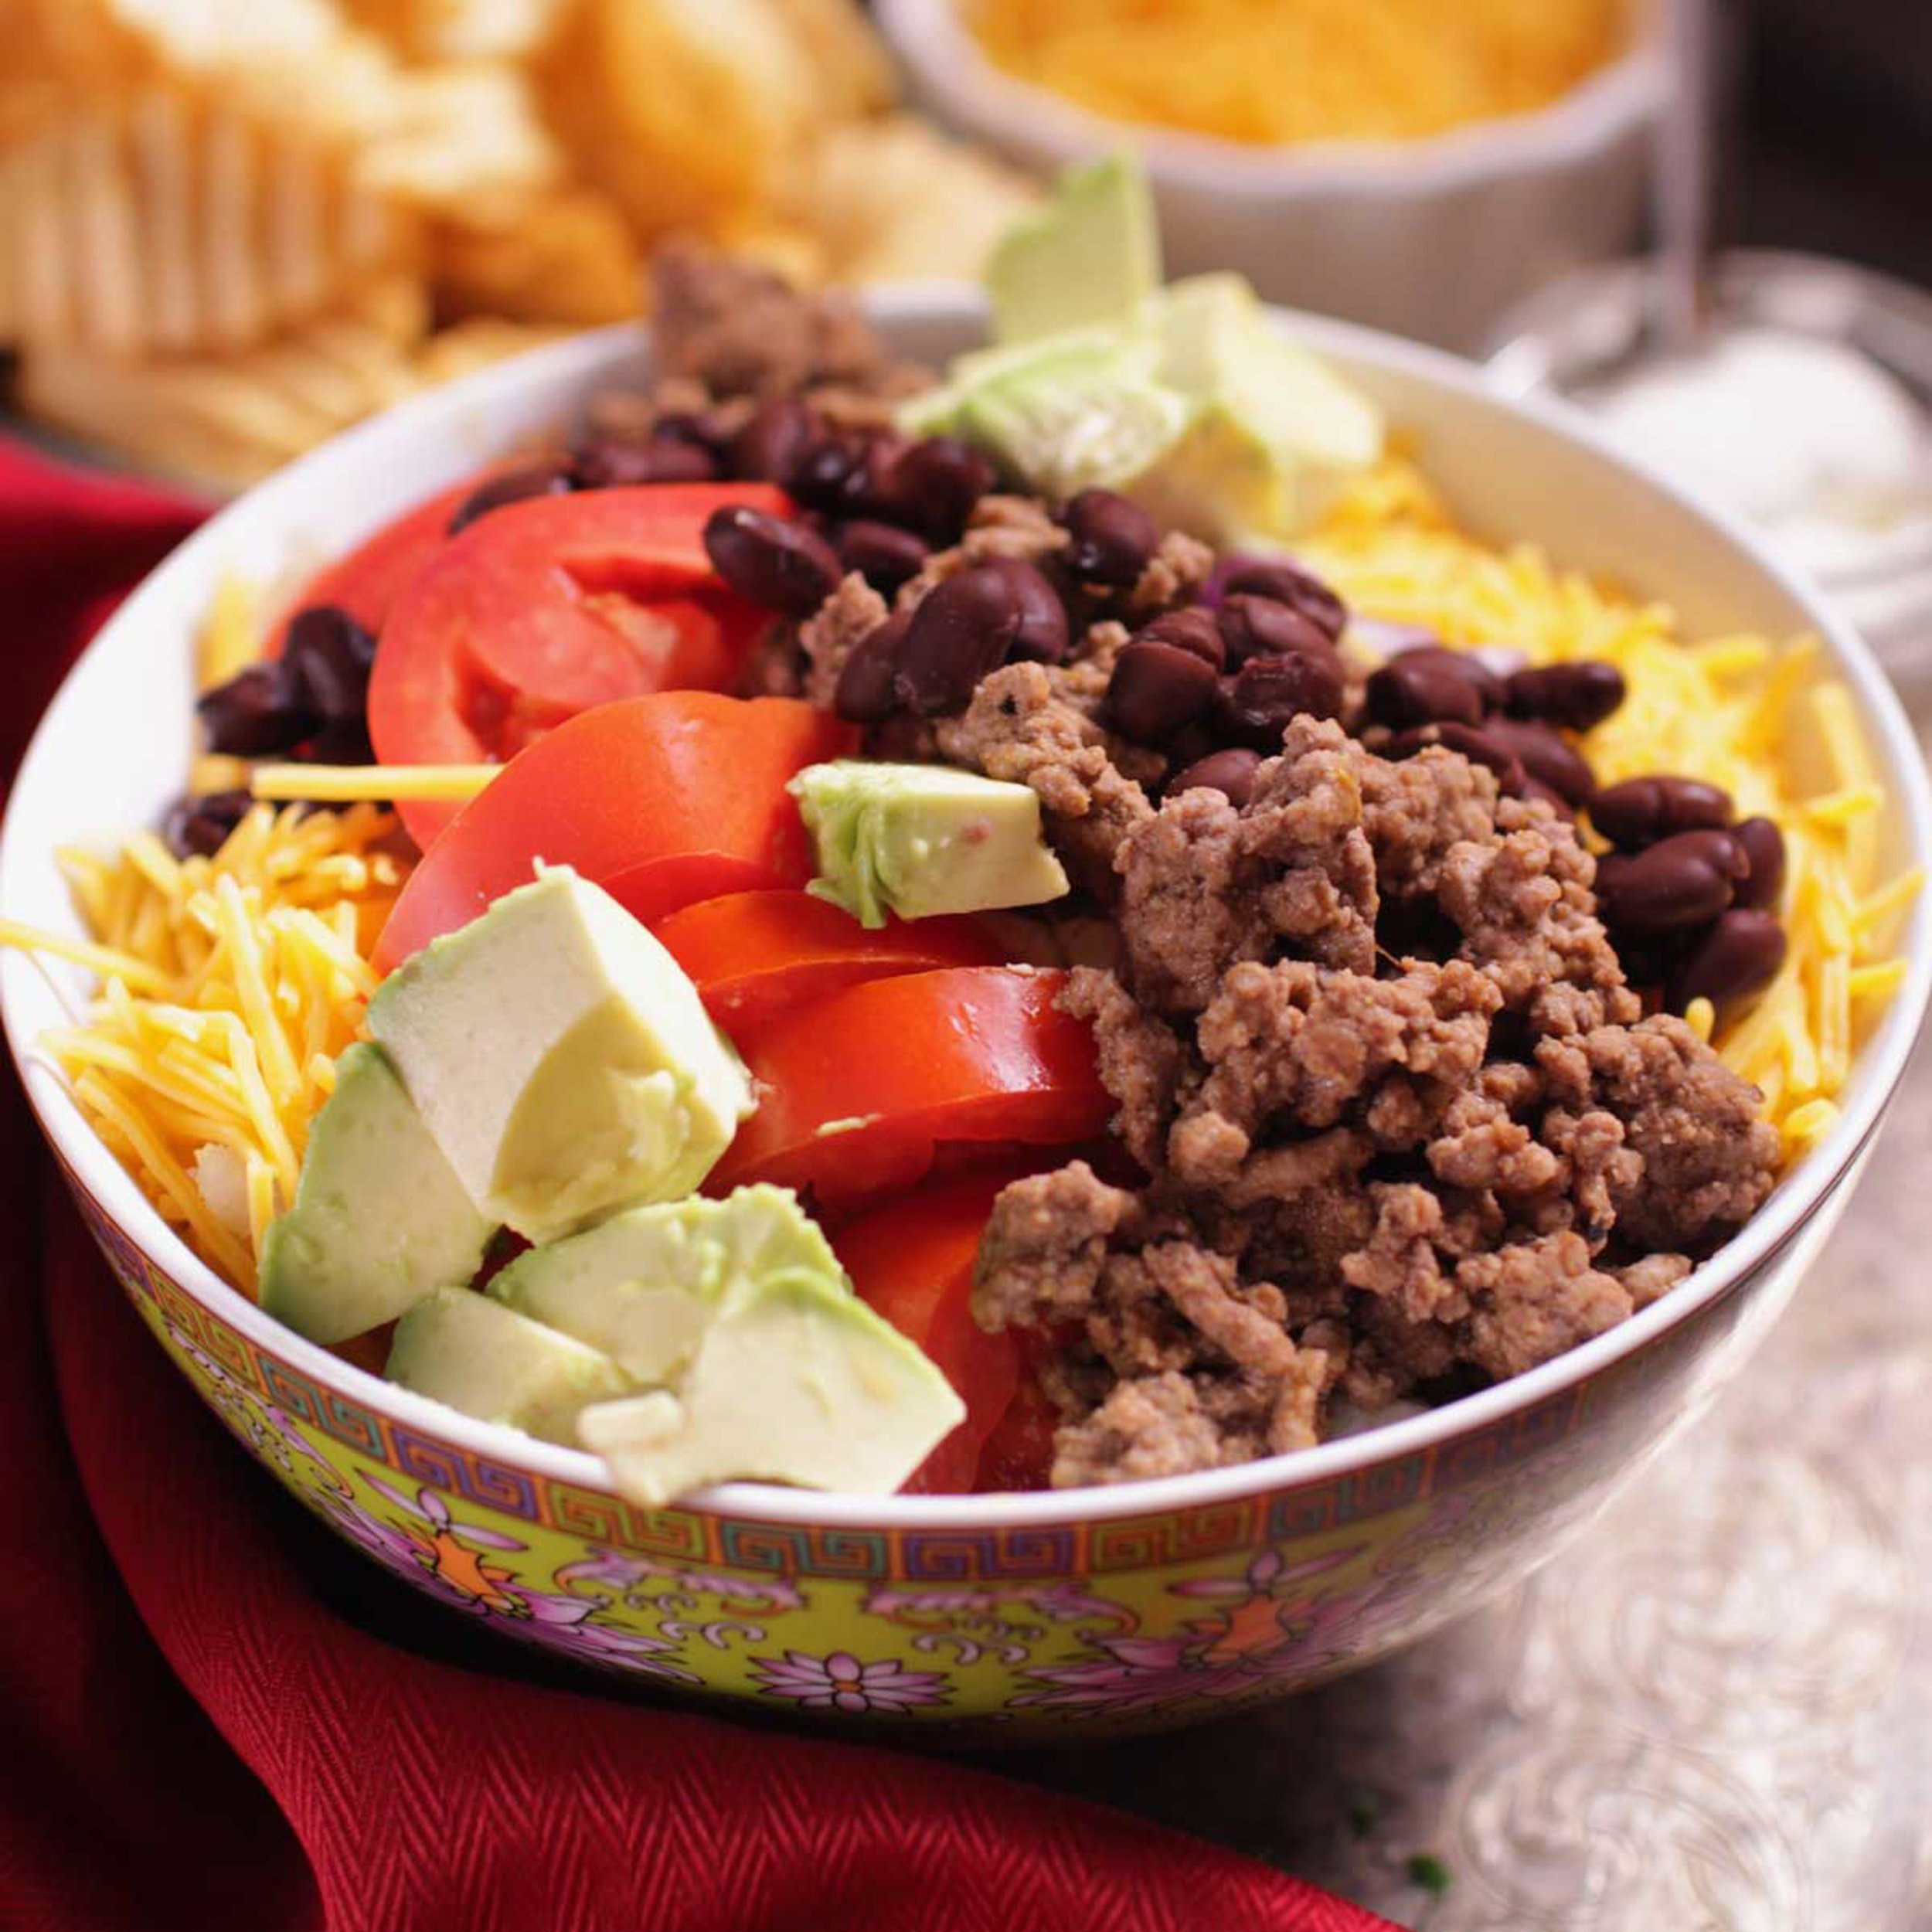 taco salad dip with ground beef